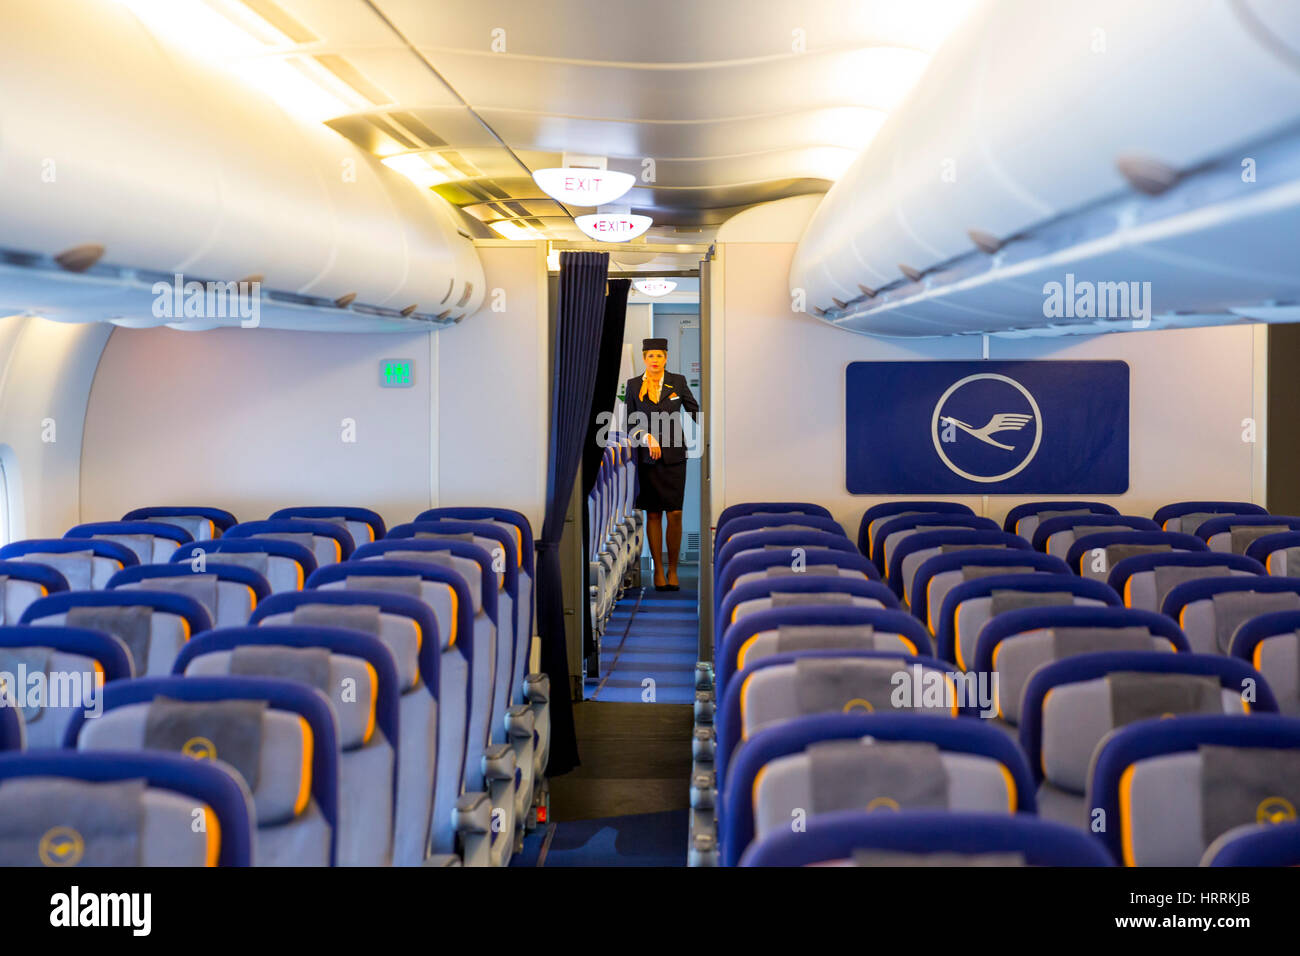 Sofia, Bulgaria - October 16, 2016: The inside of Lufthansa Airbus A380 airplane. The Airbus A380 is a double-deck, wide-body, four-engine jet airline Stock Photo